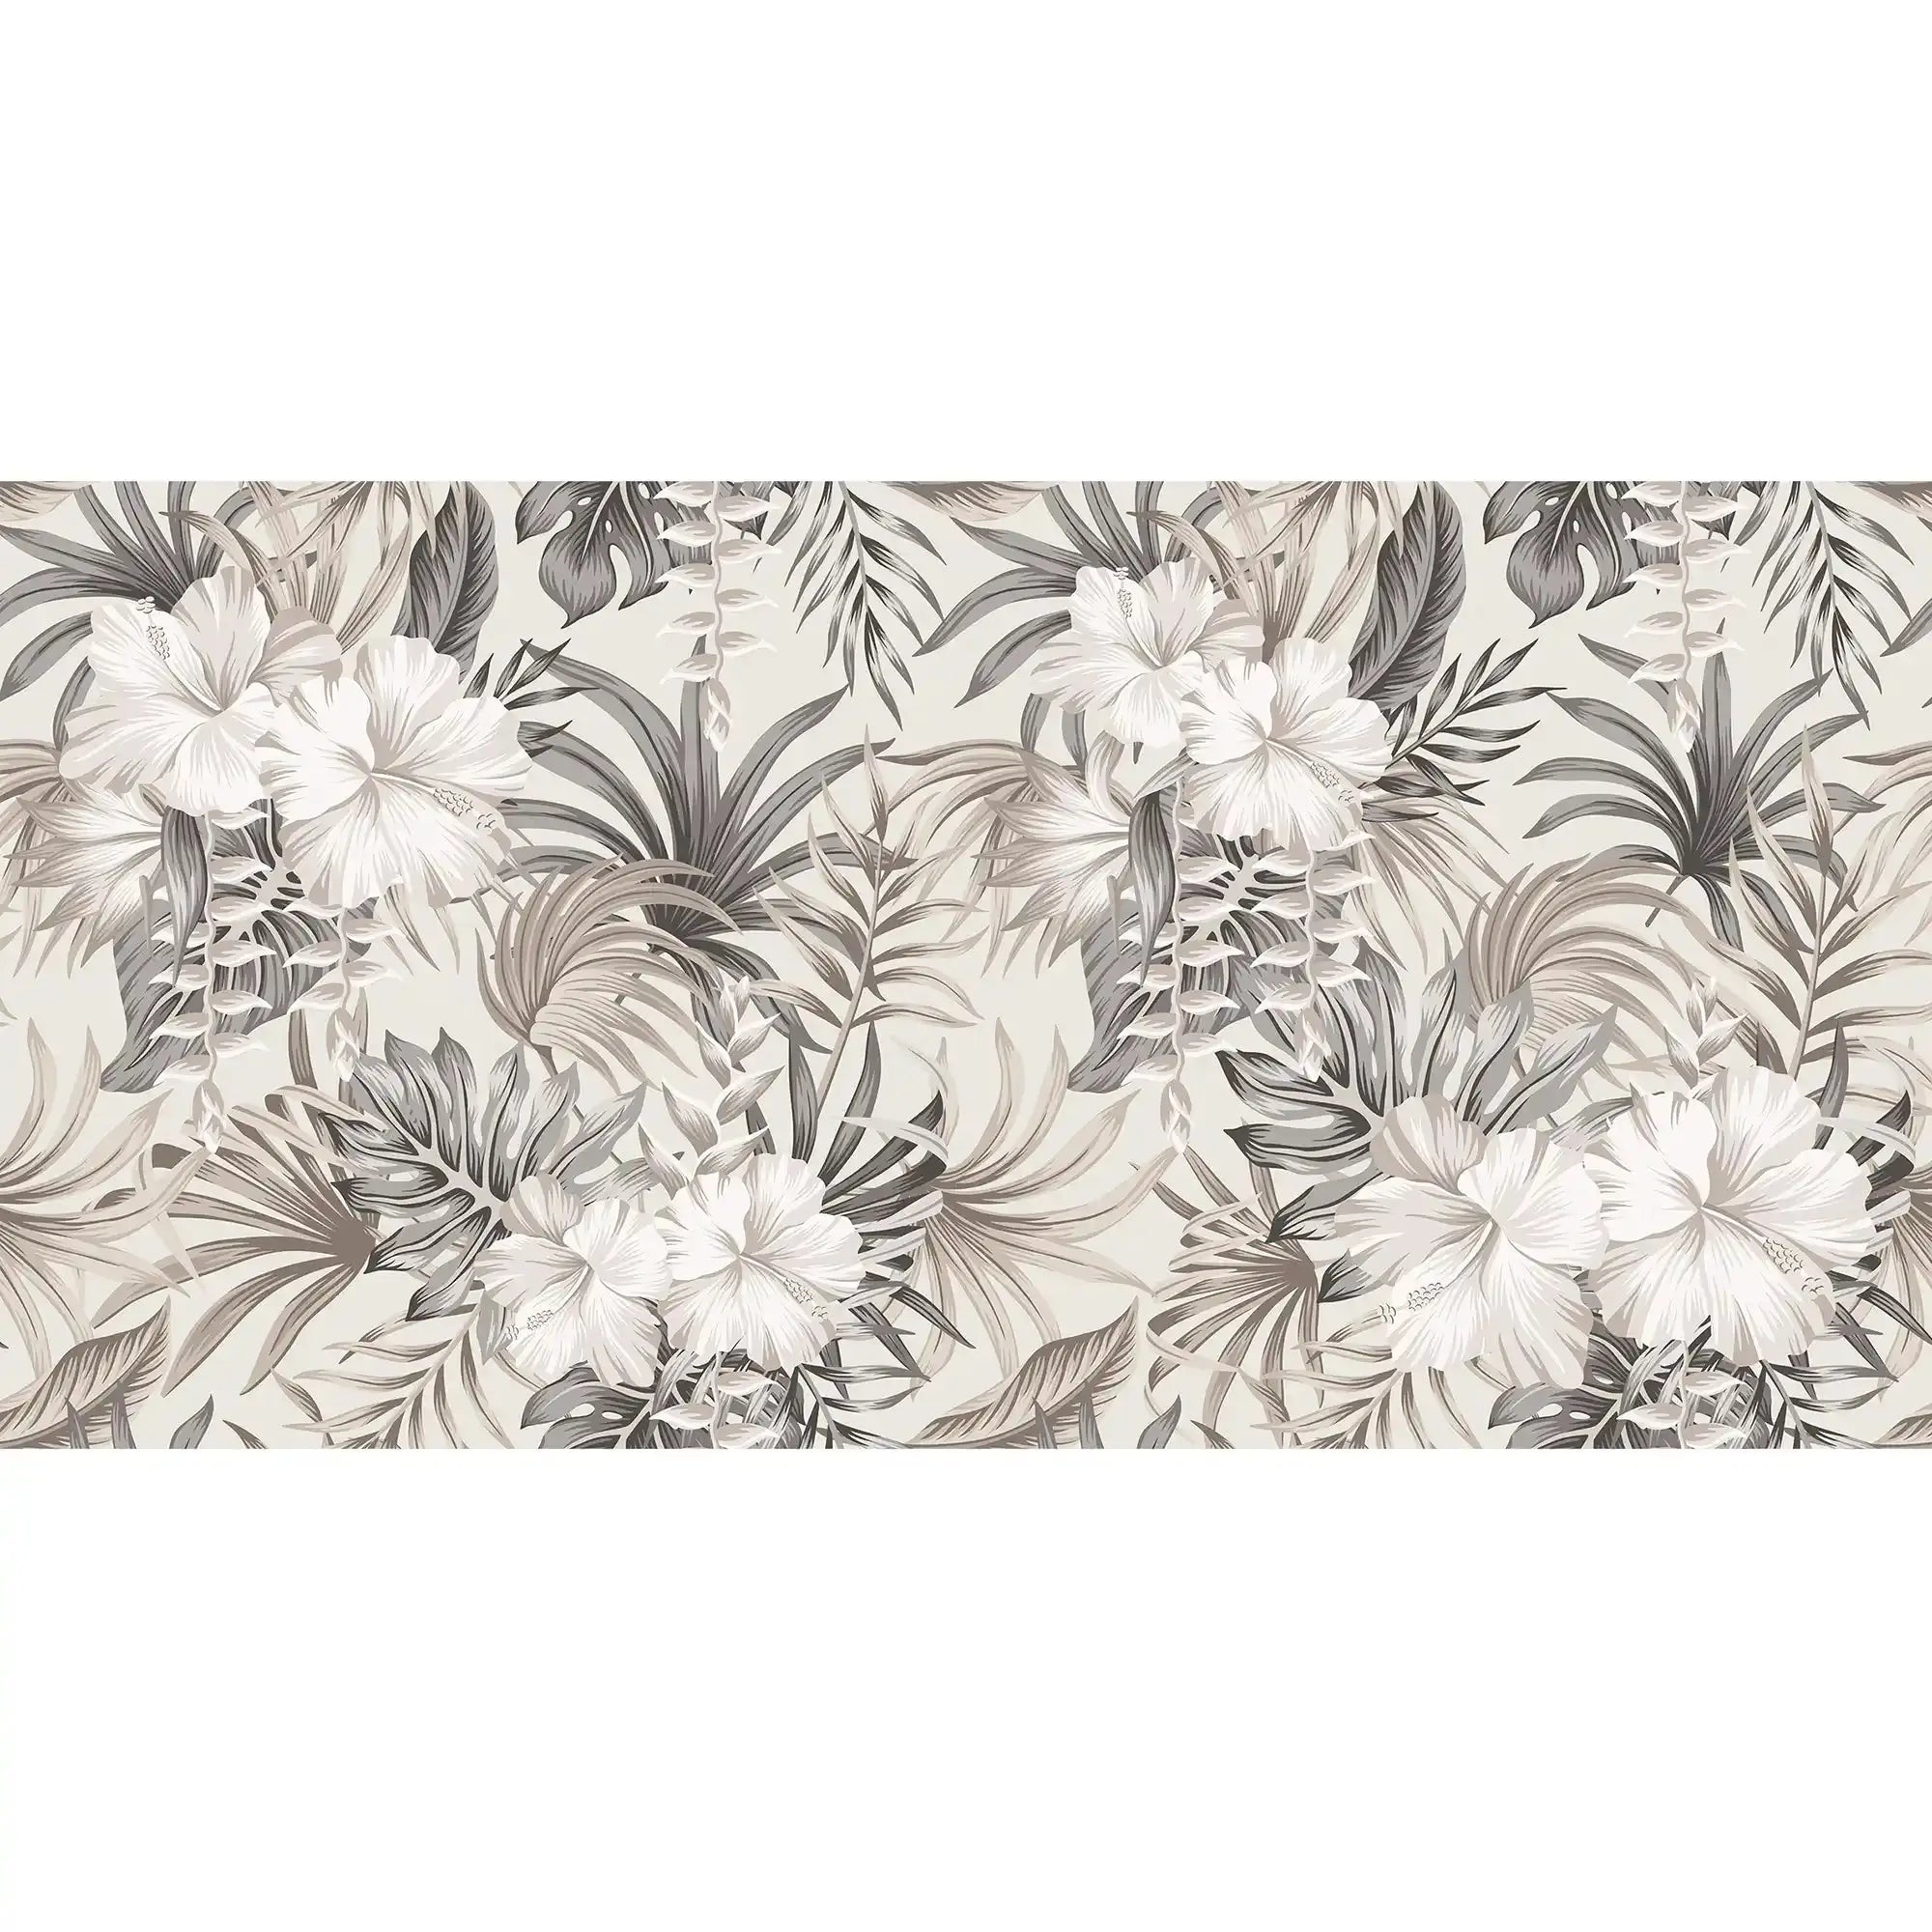 3099-F / Contemporary Floral Peel and Stick Wallpaper, Trendy Tropical Pattern, Adhesive Wall Paper, Easy Installation for Kitchen, Bedroom, Bathroom - Artevella